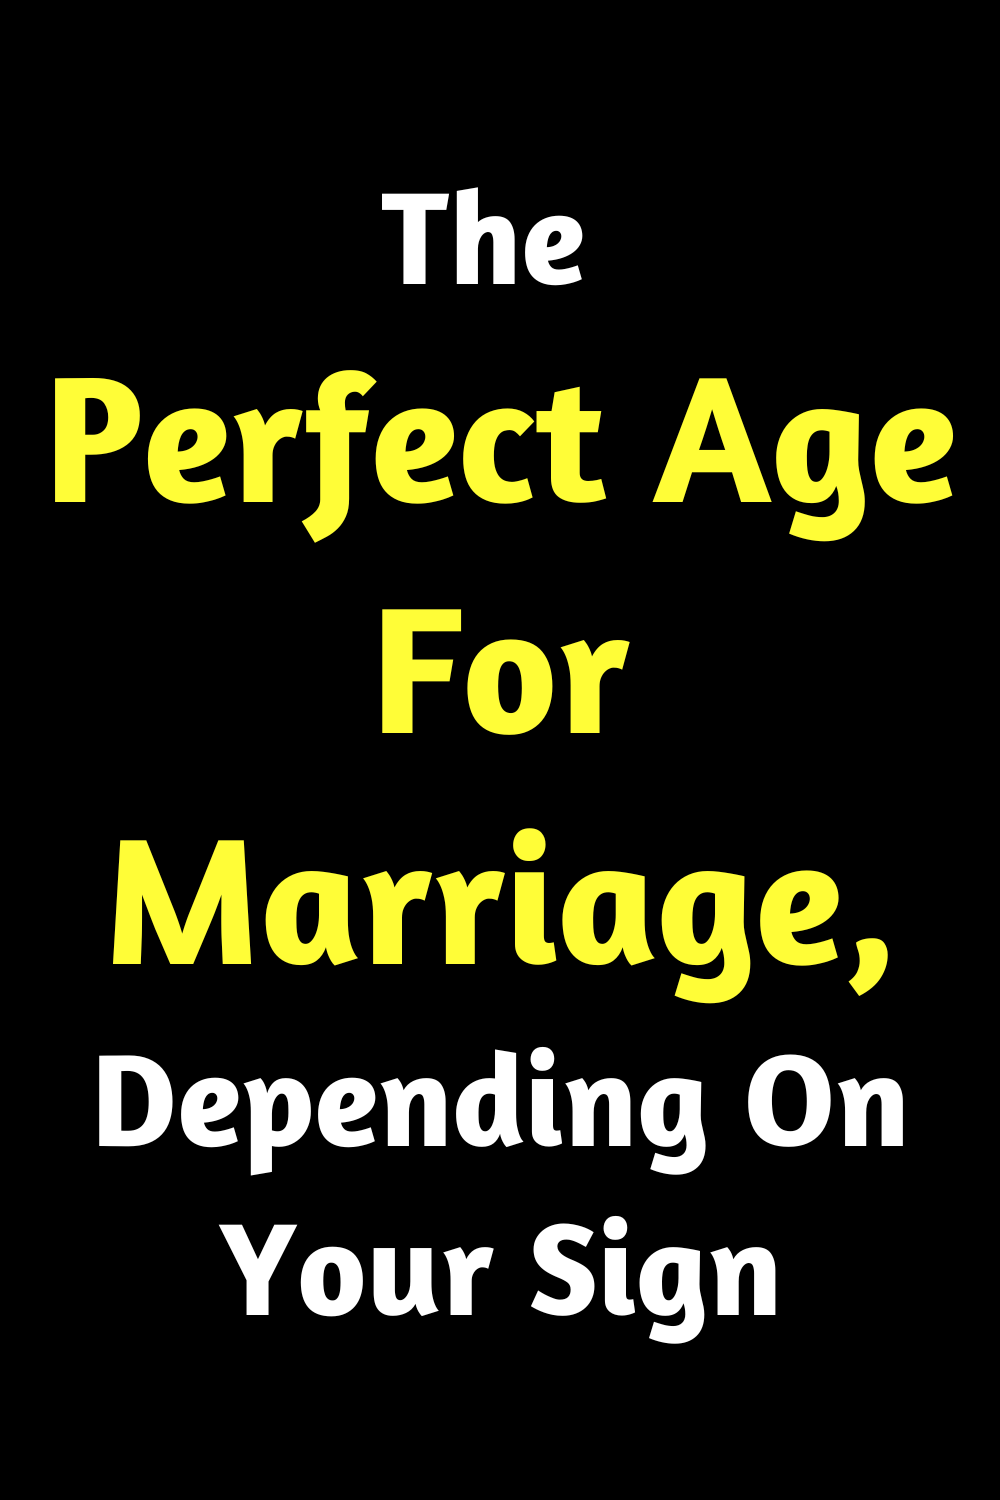 The Perfect Age For Marriage, Depending On Your Sign